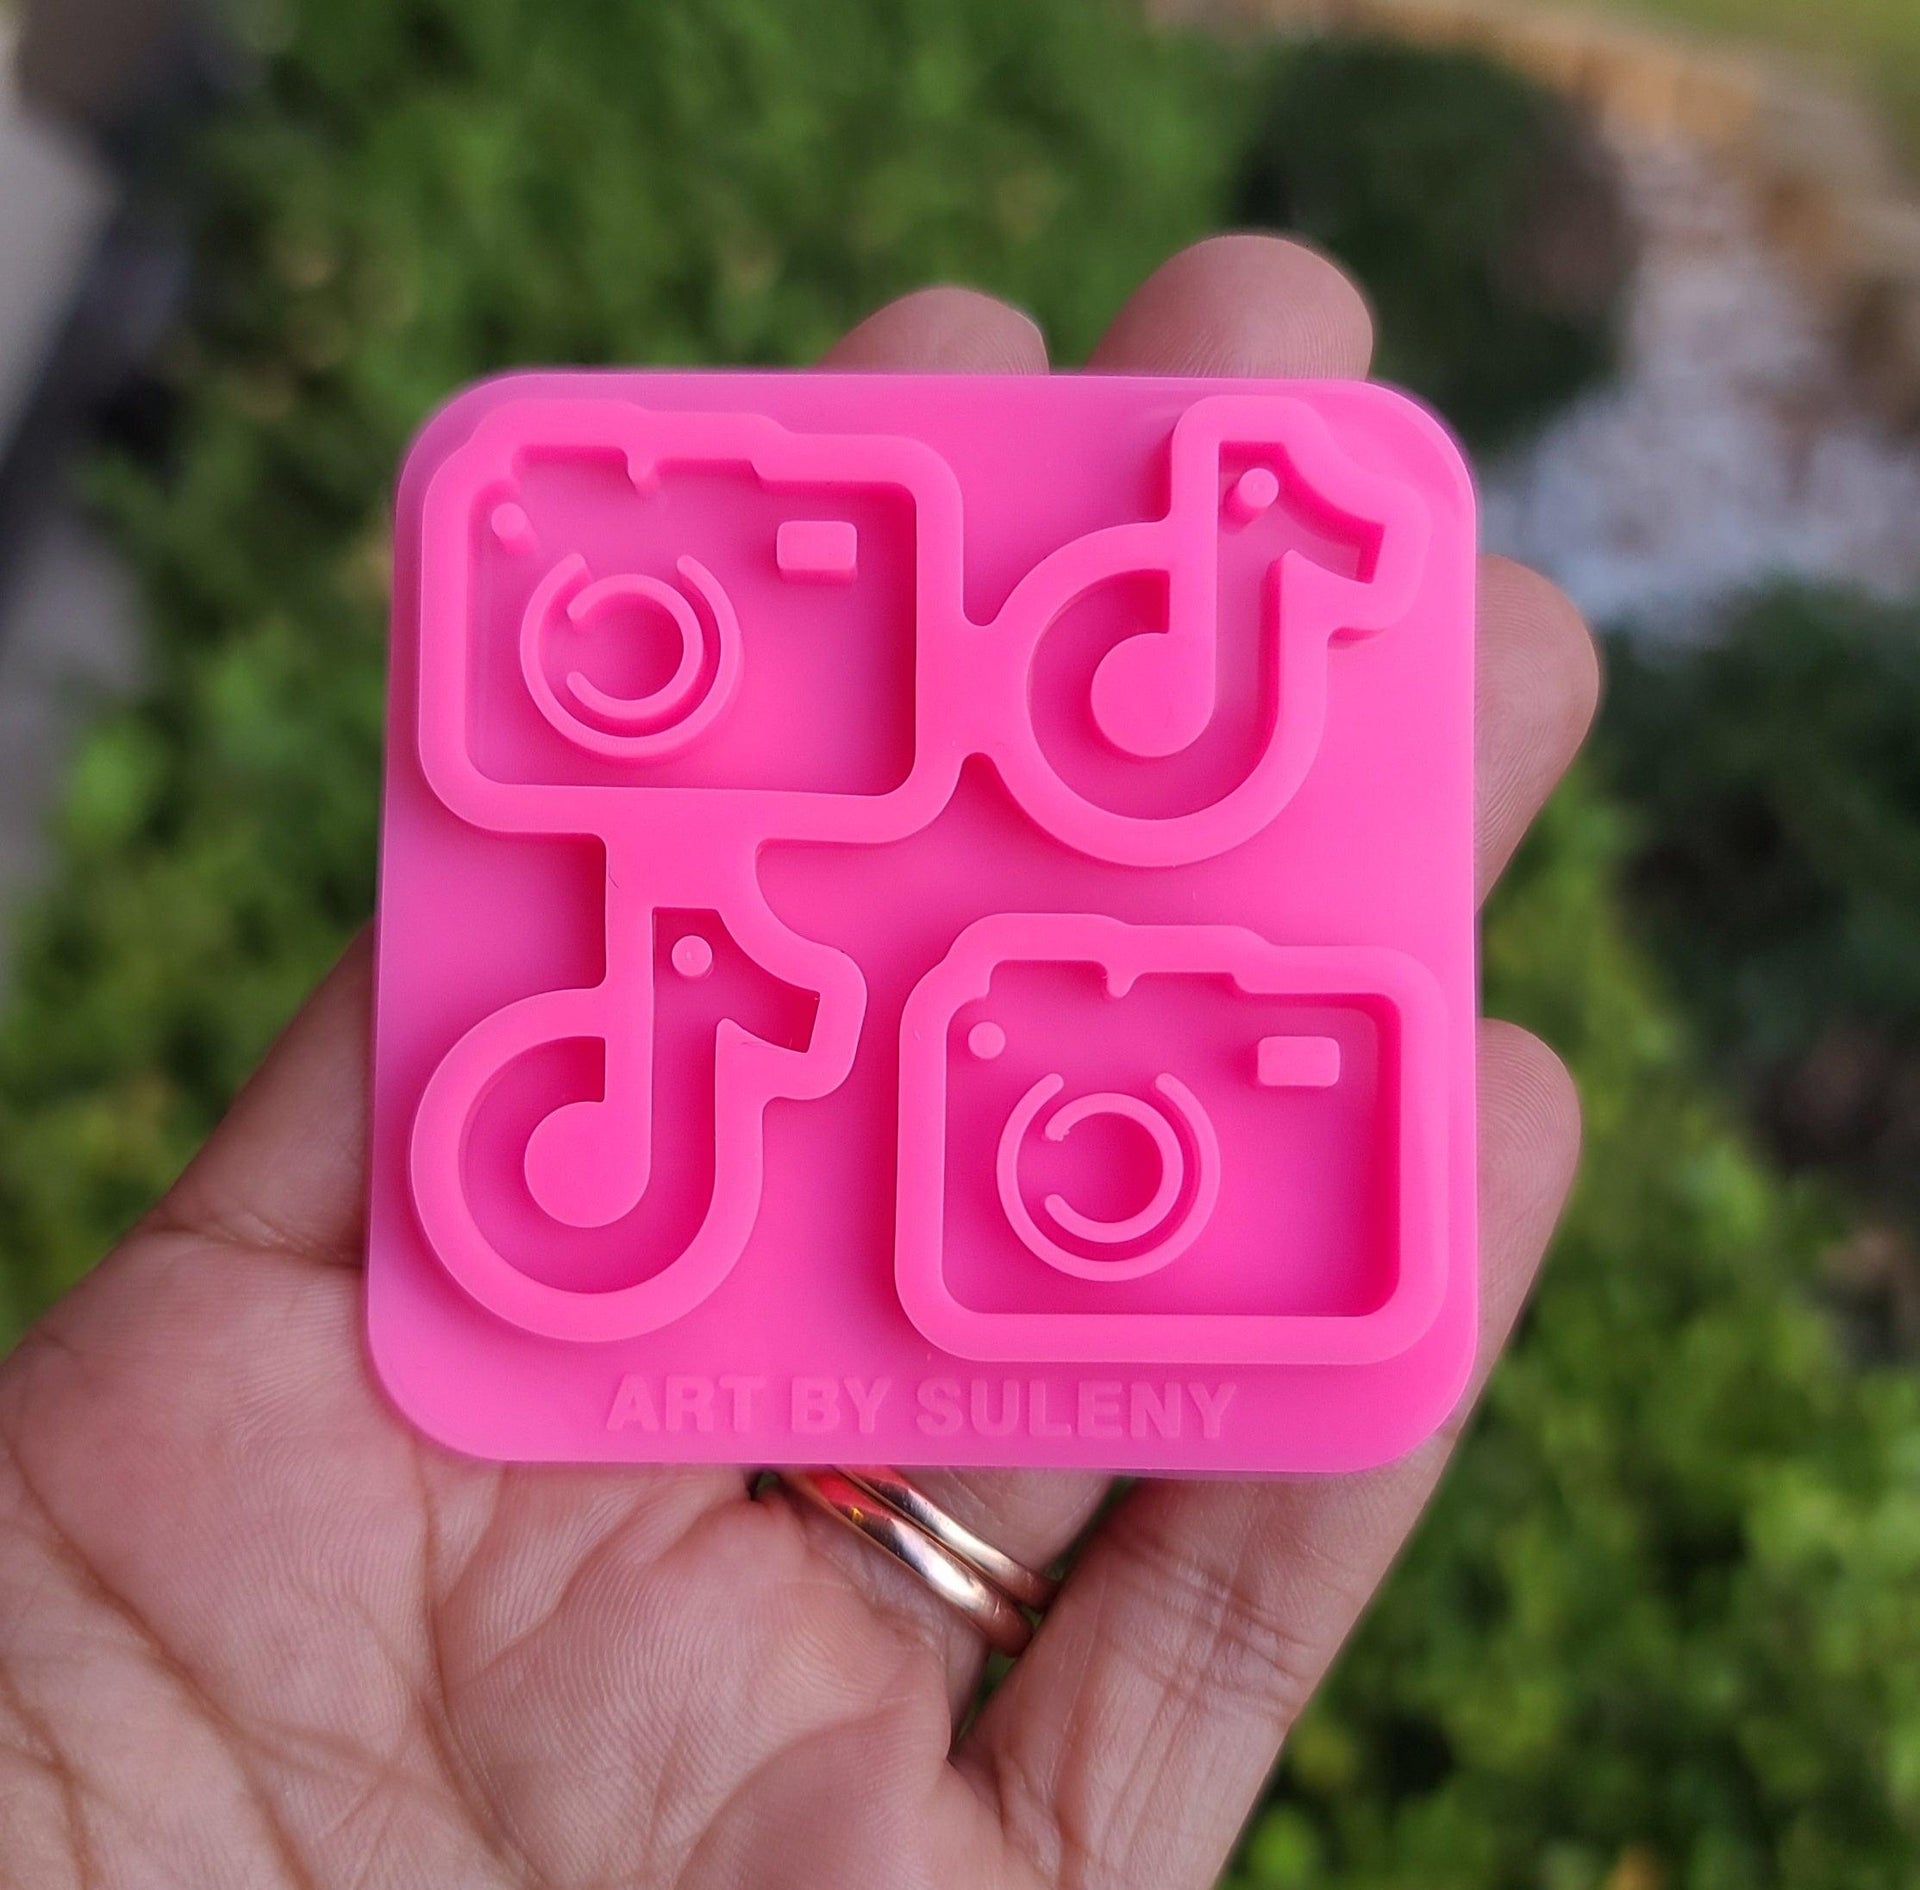 Silicone Molds - TikTok Silicone Mold - Molds for Earrings - Camera Silicone Mold - Art By Suleny Craft Store LLC